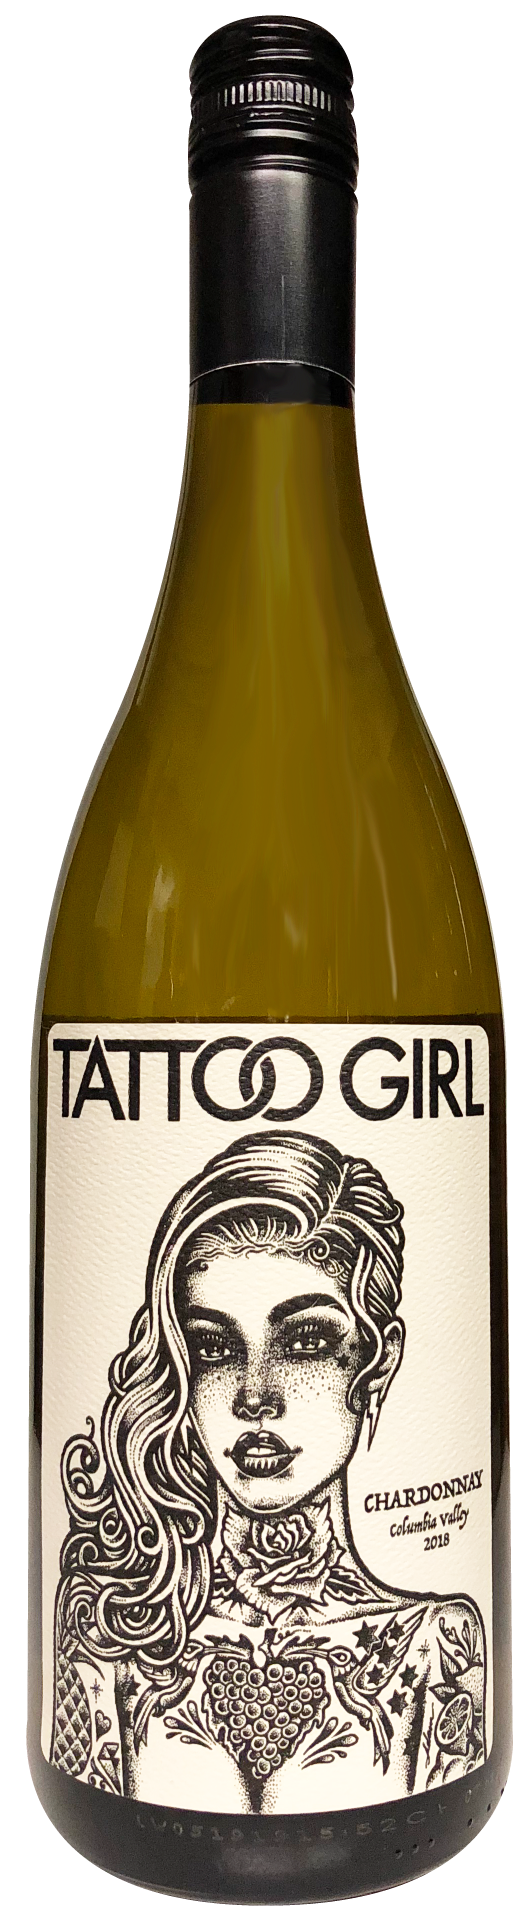 Wednesday August 18 2021 Complimentary Tattoo Girl Wine Tasting at 10th   Terrace  Residence Inn Raleigh Downtown Events